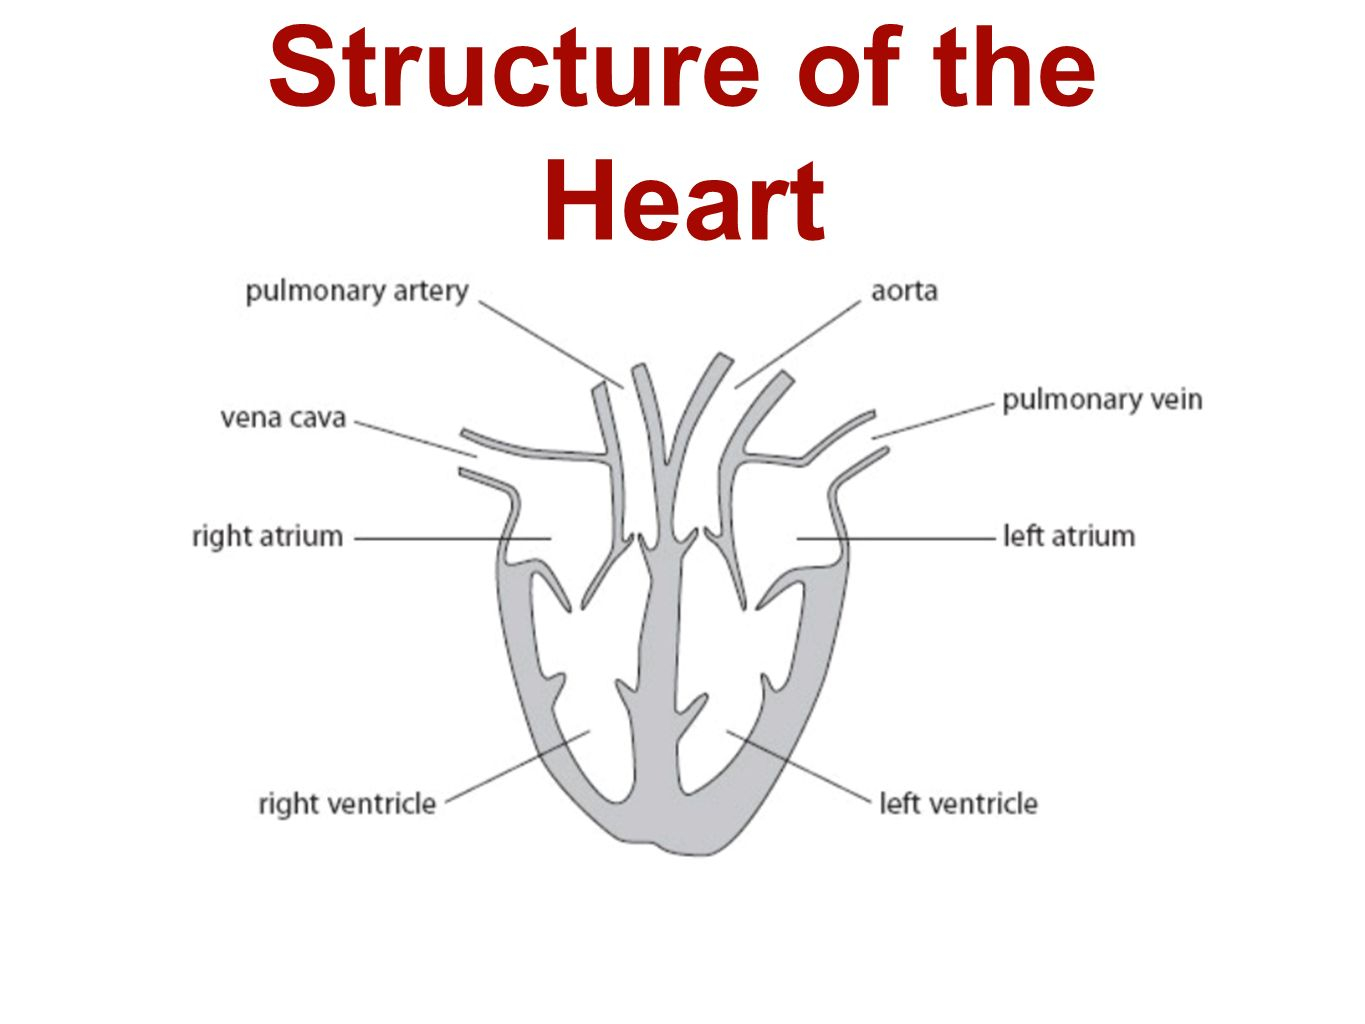 The Heart Diagram B2 Topic 3 Starter Stick In The Heart Diagram Ppt Video Online